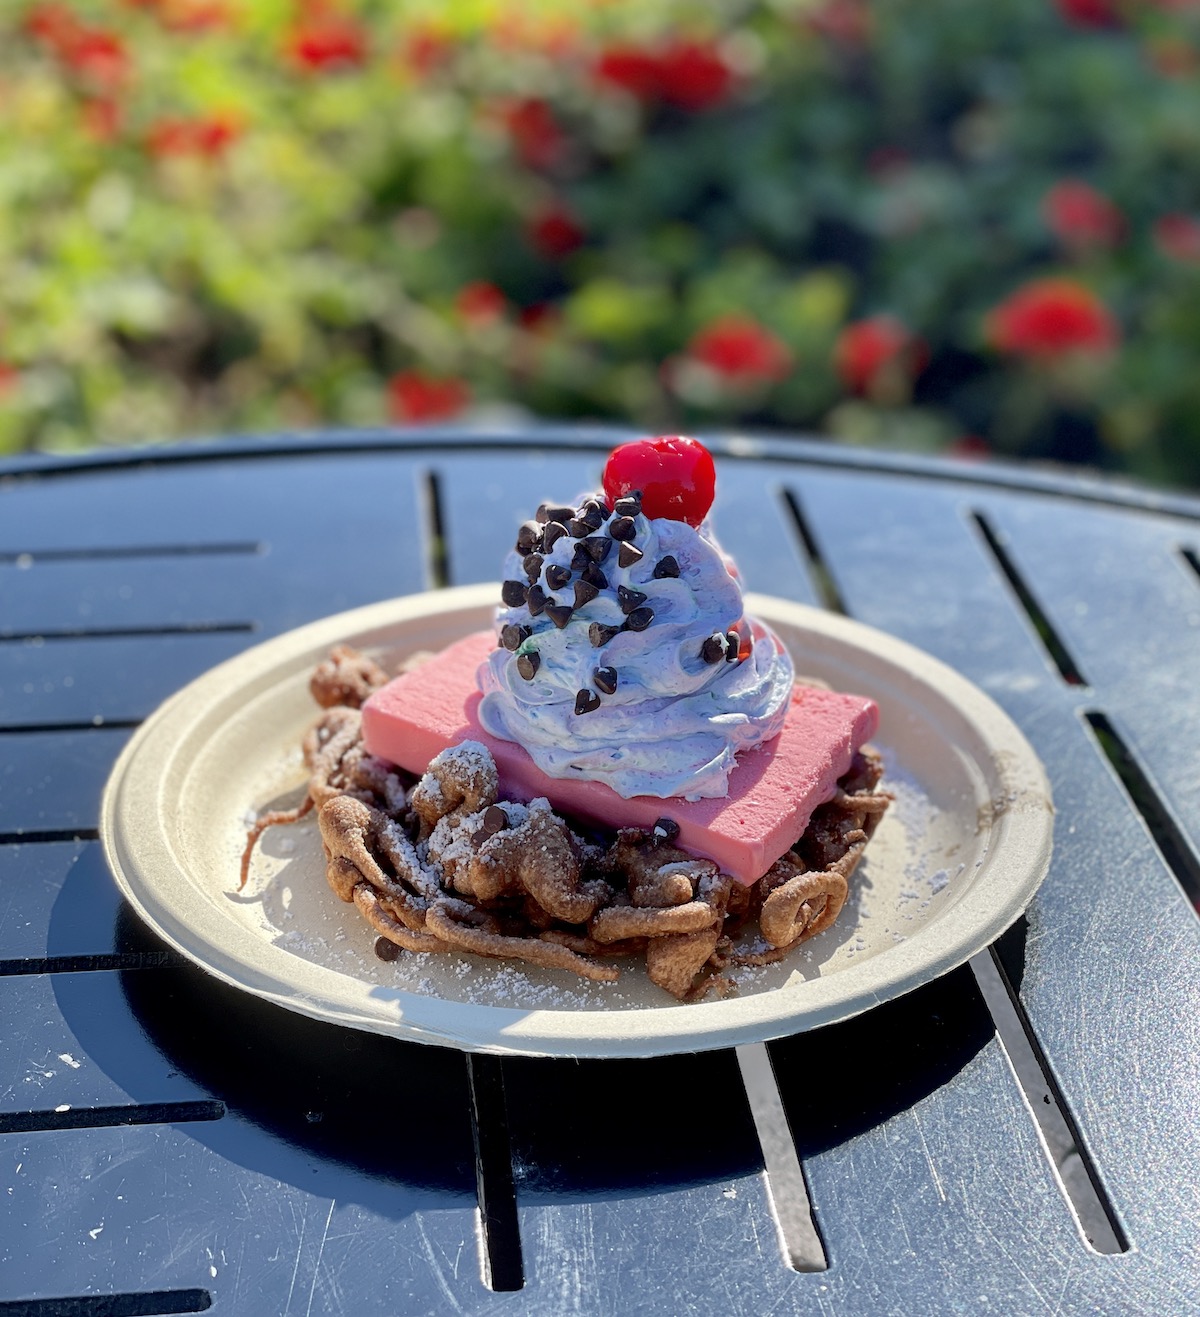 Funnel cake at Epcot Festival of the Arts 2022.